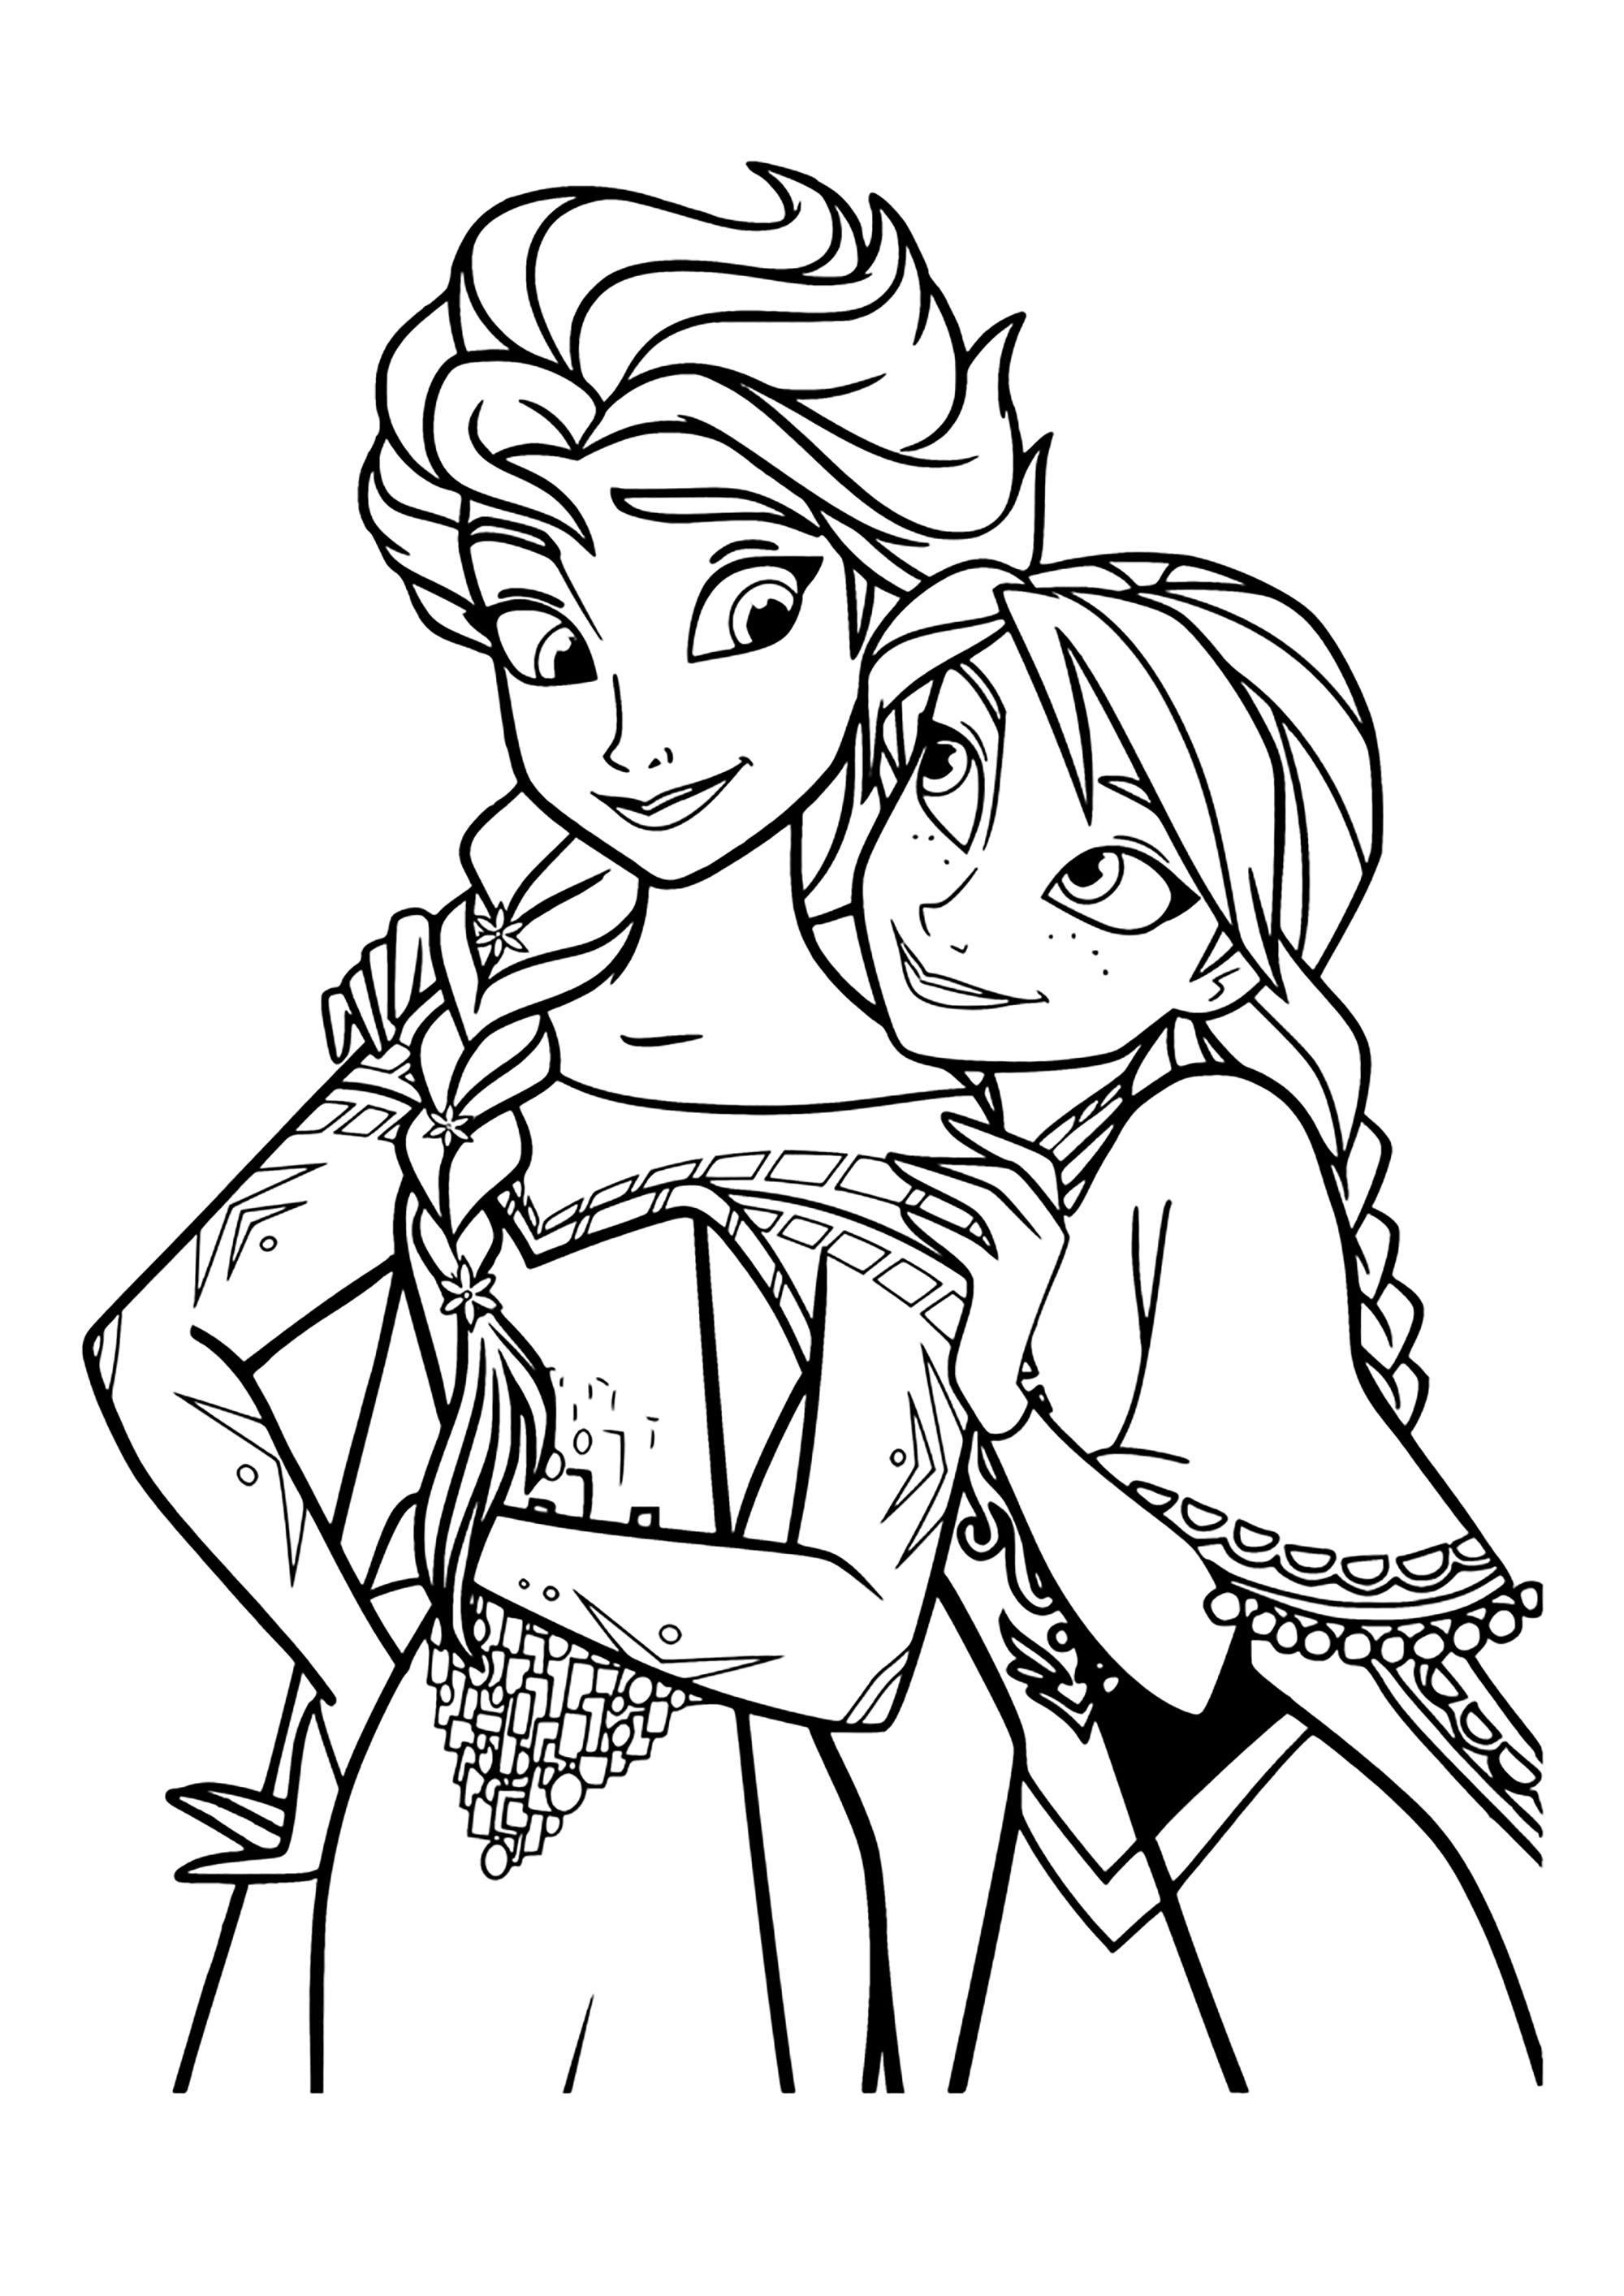 Frozen 2 to color for kids Frozen 2 Kids Coloring Pages